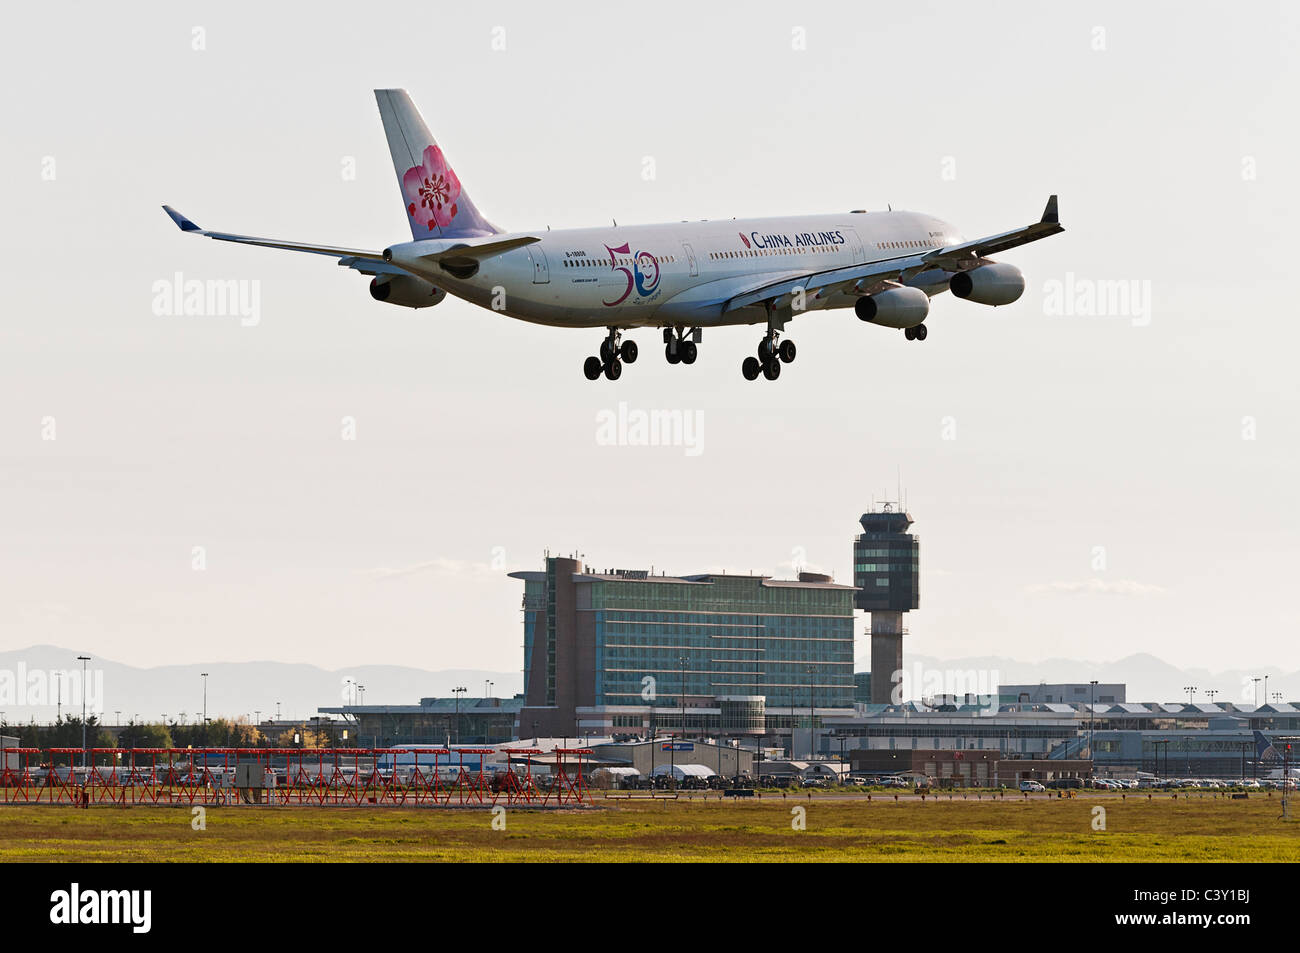 A China Airlines Airbus A340-300 jet airliner on final approach for landing at Vancouver International Airport, Canada. Stock Photo